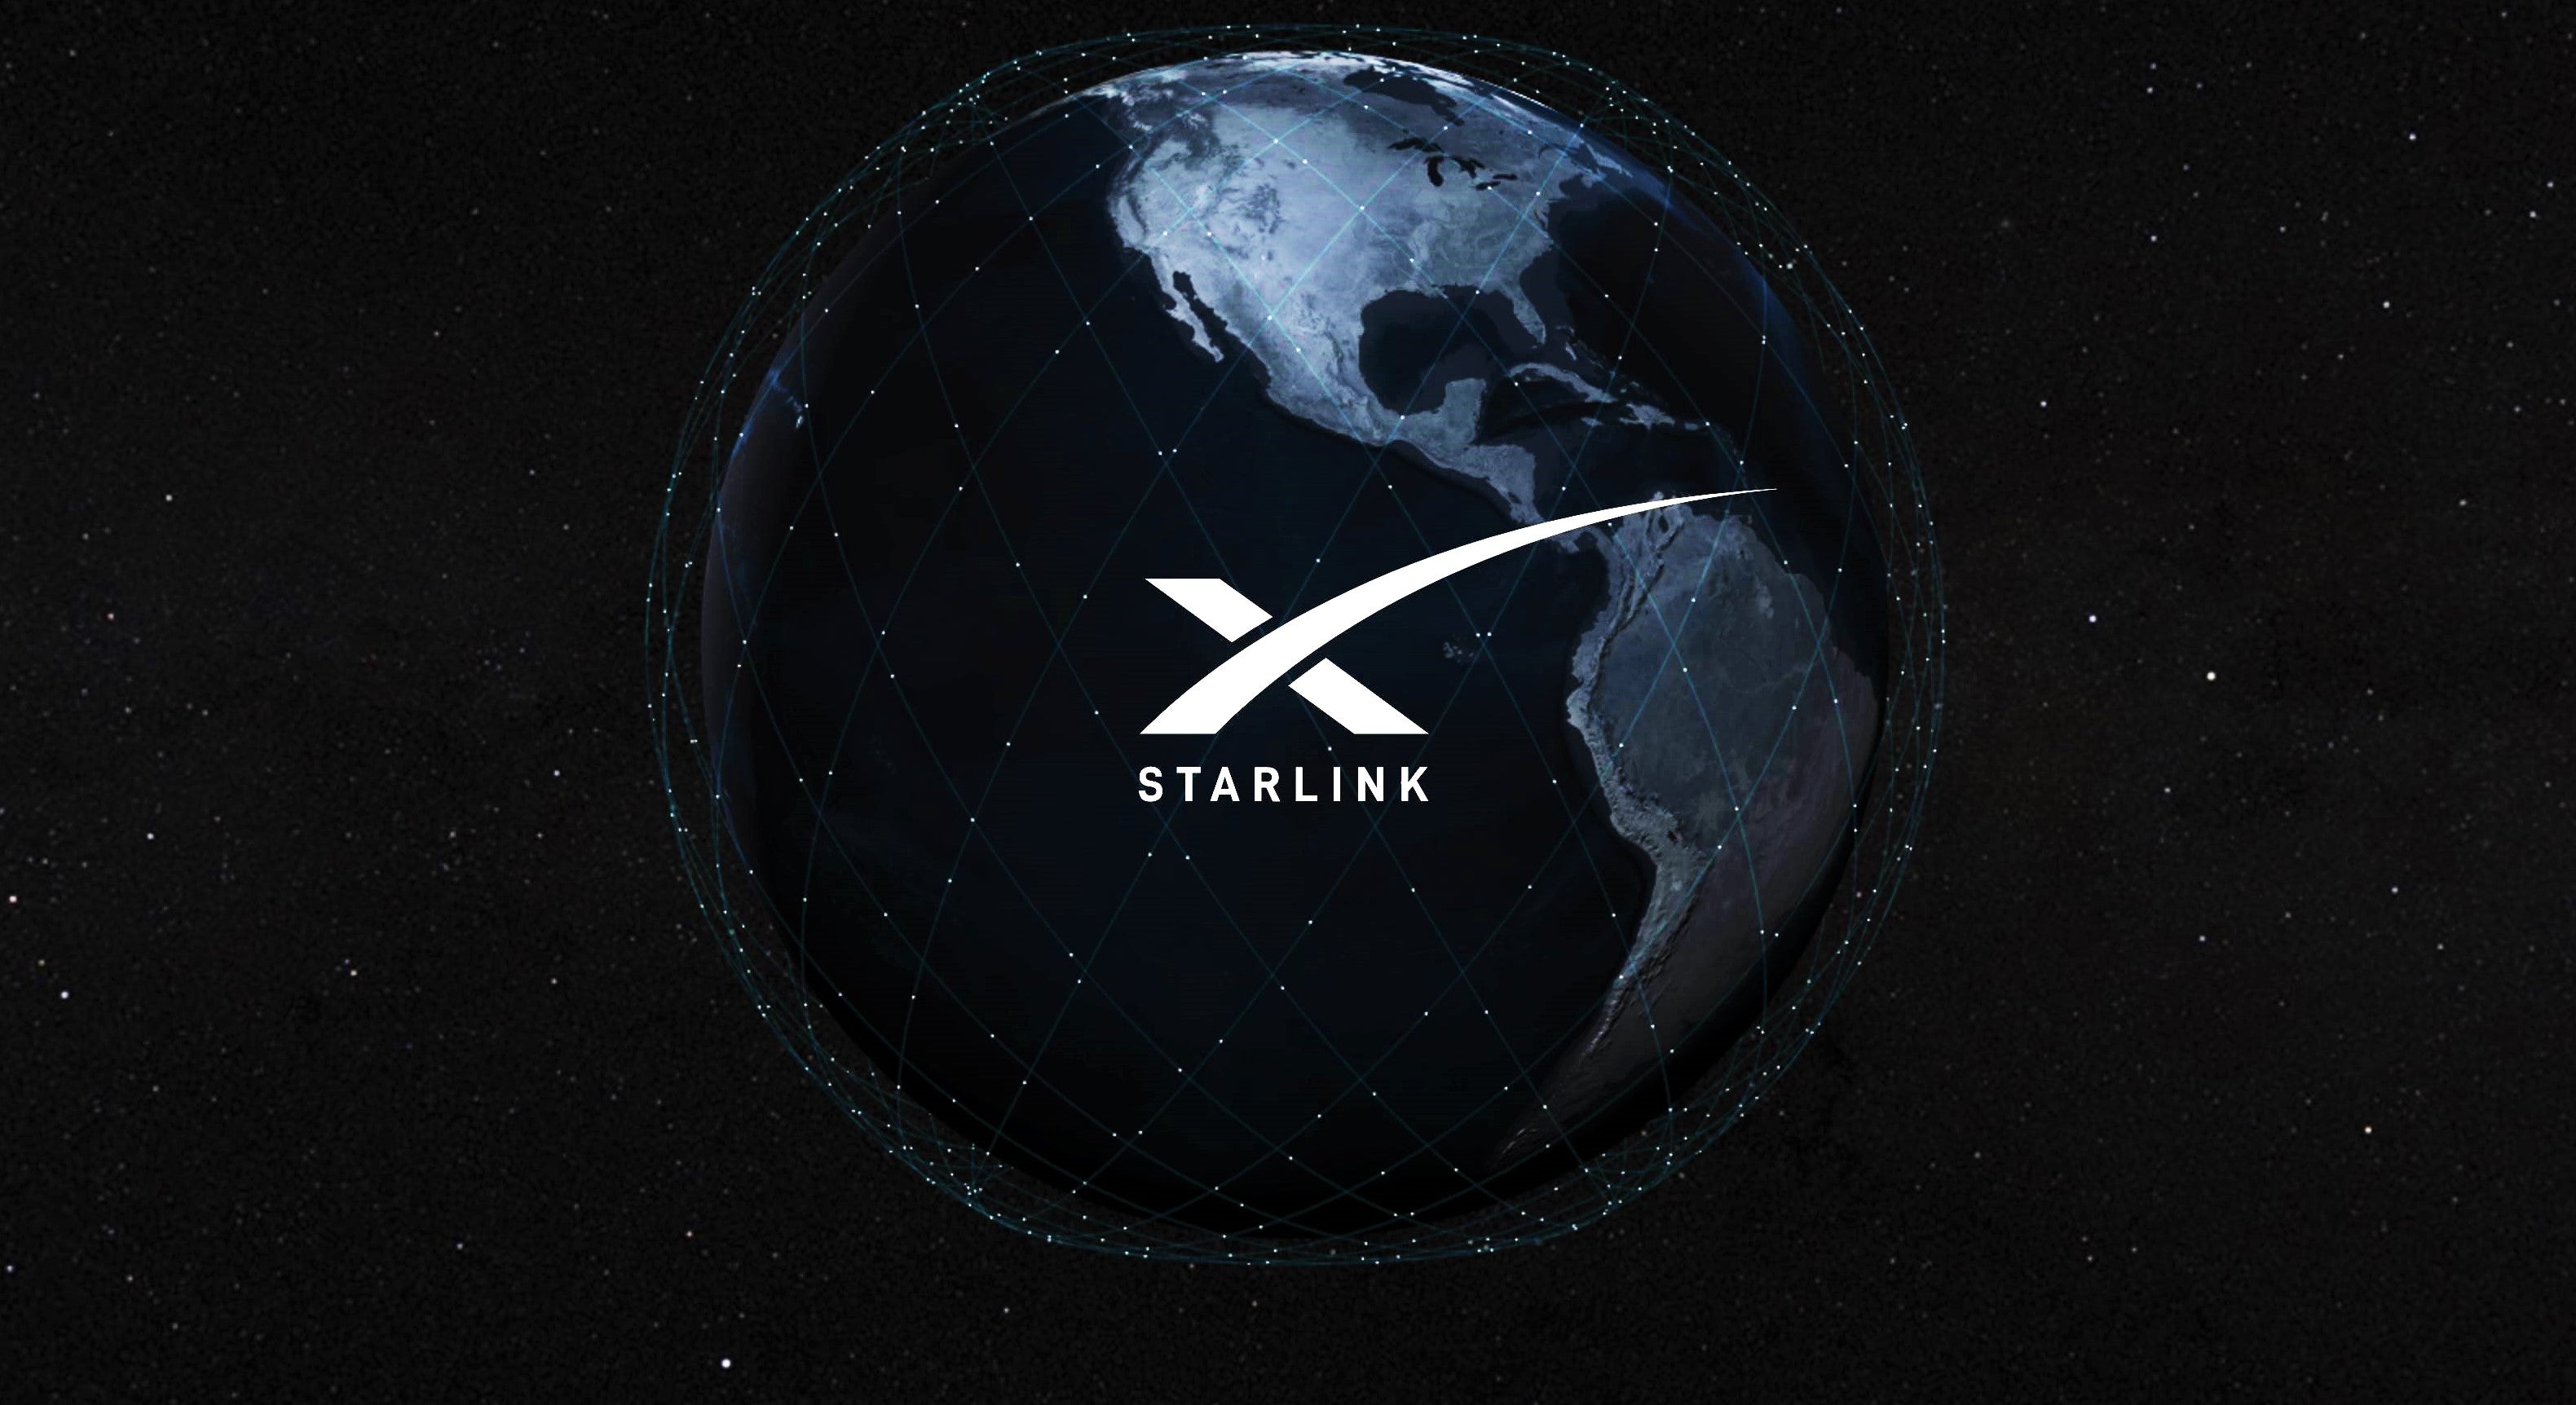 SpaceX submits application to offer Starlink broadband internet in Canada